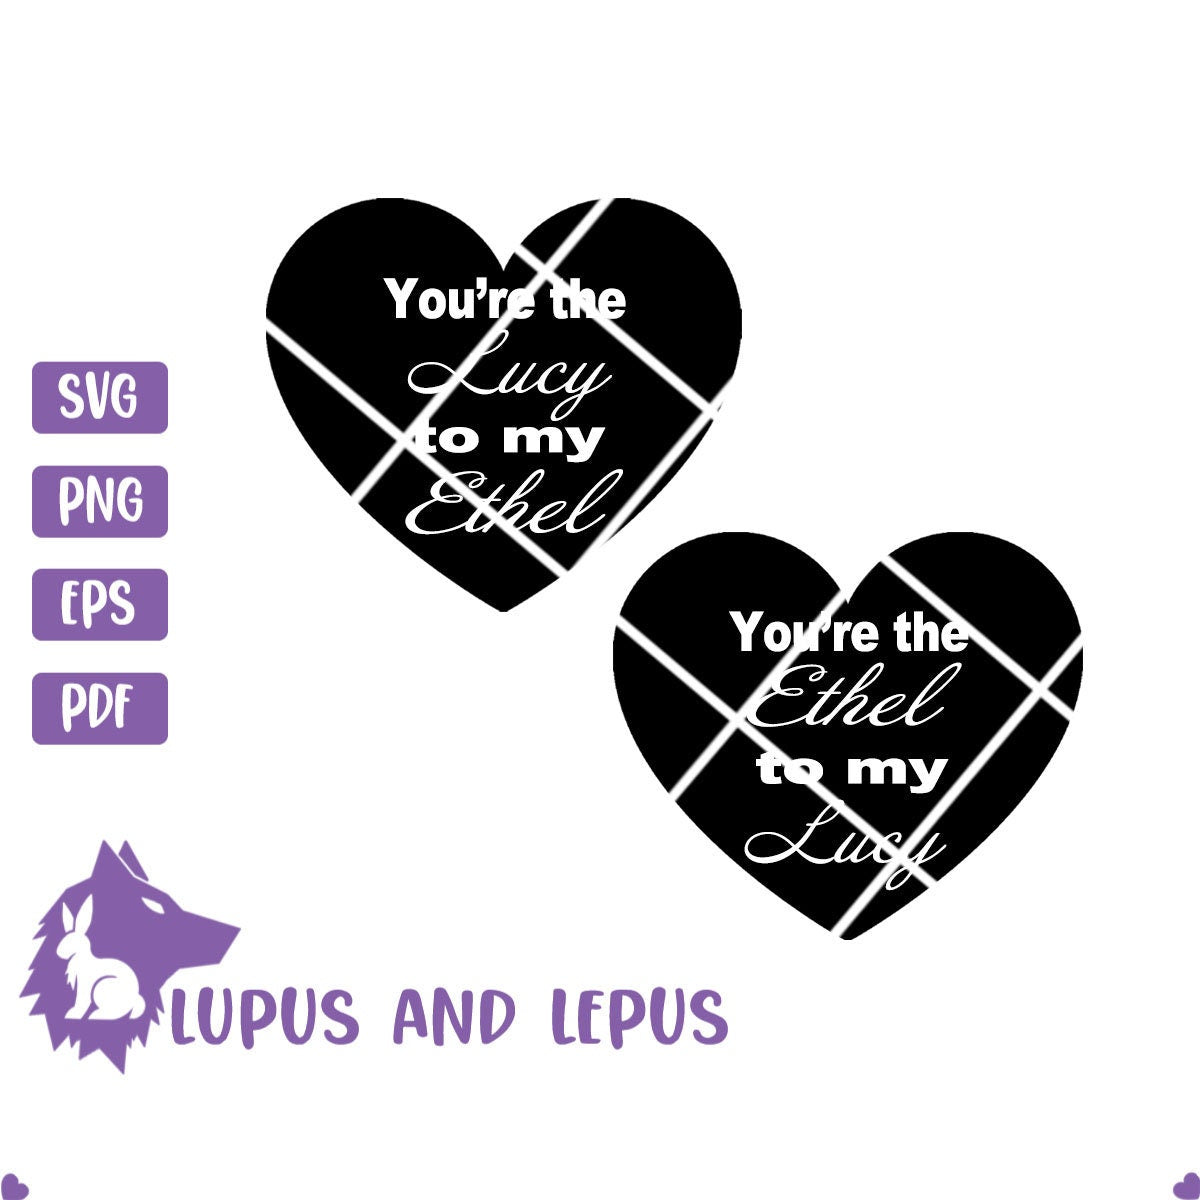 Digital File - You're the Lucy to my Ethel, lucy svg, ethel svg, I love lucy,   lucy and ethel, lucy and rickey, ethel and fred